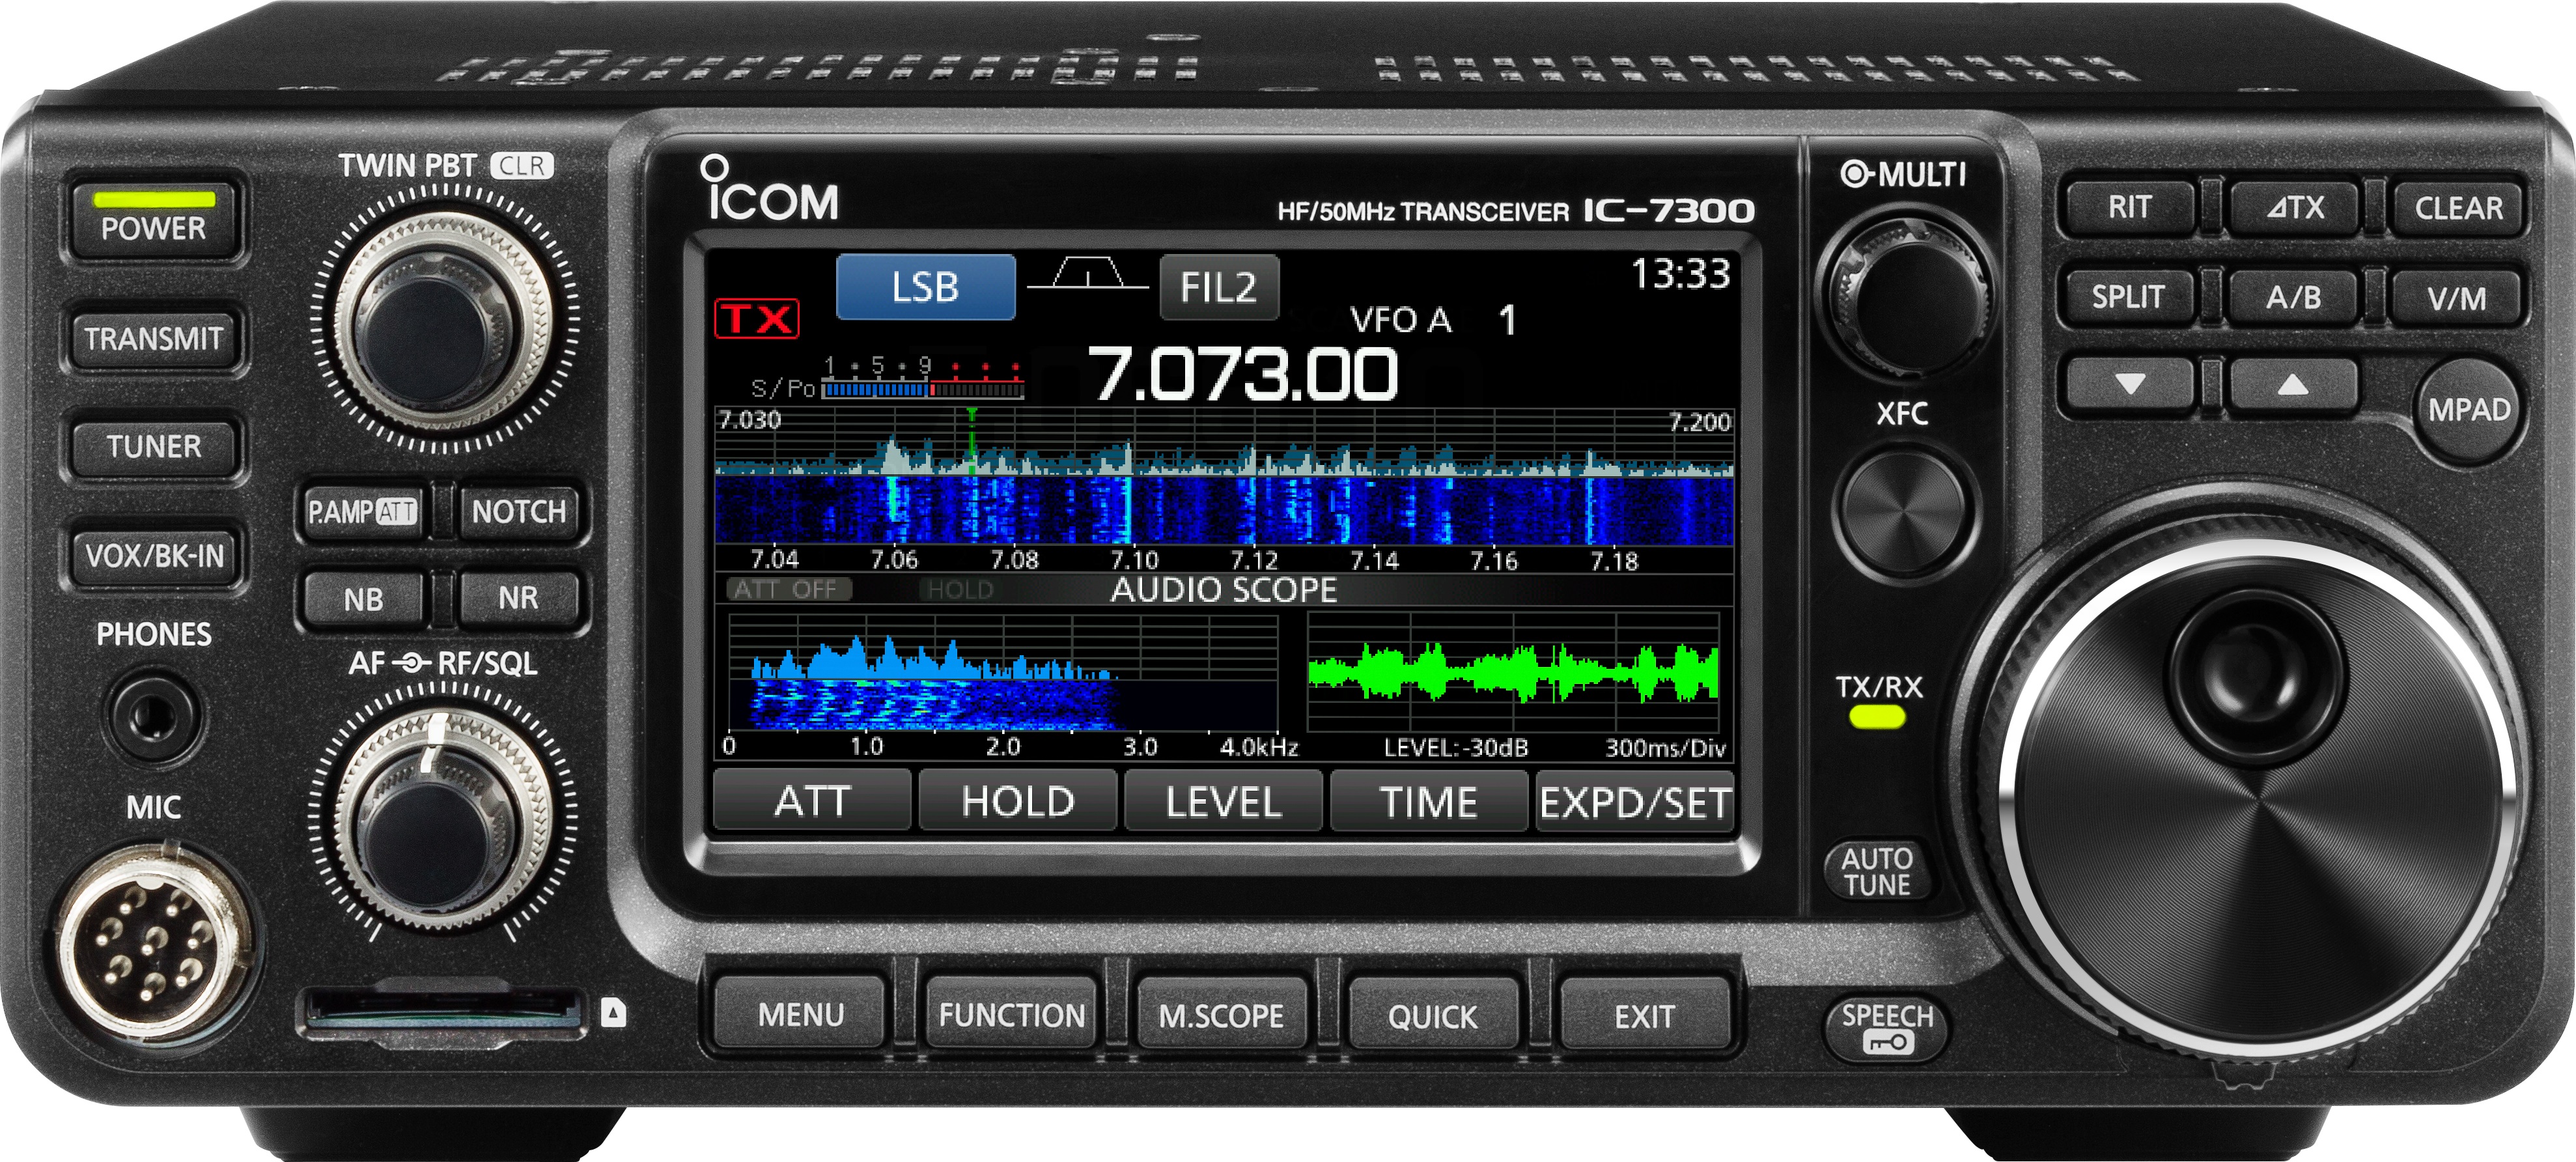 IC-7300 Review and operating tips hq nude image